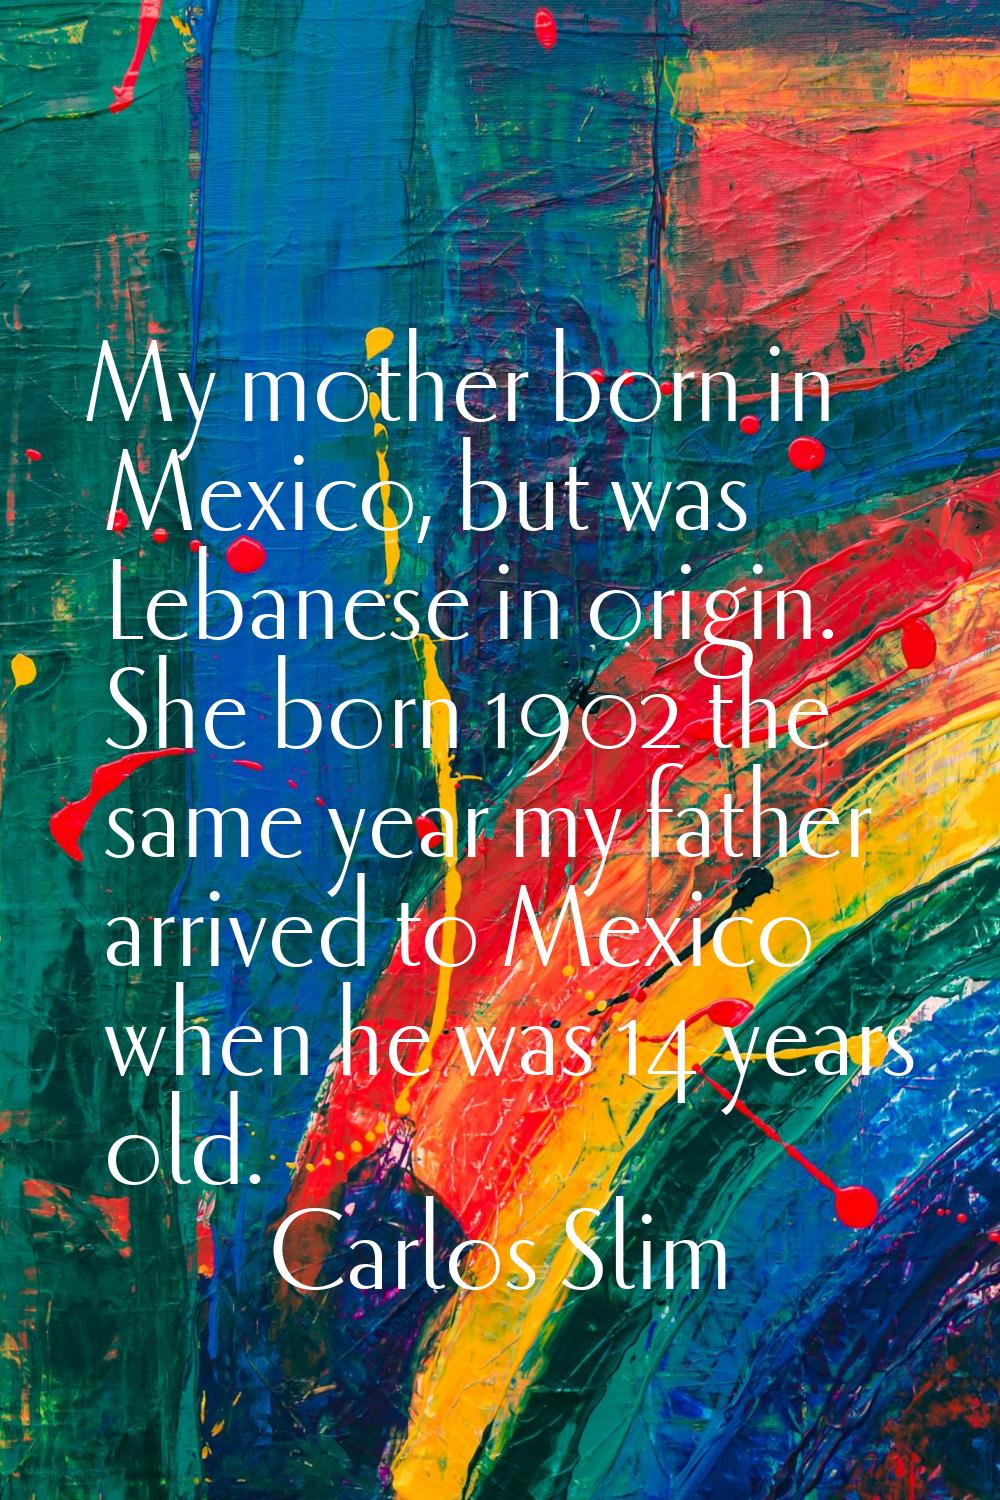 My mother born in Mexico, but was Lebanese in origin. She born 1902 the same year my father arrived